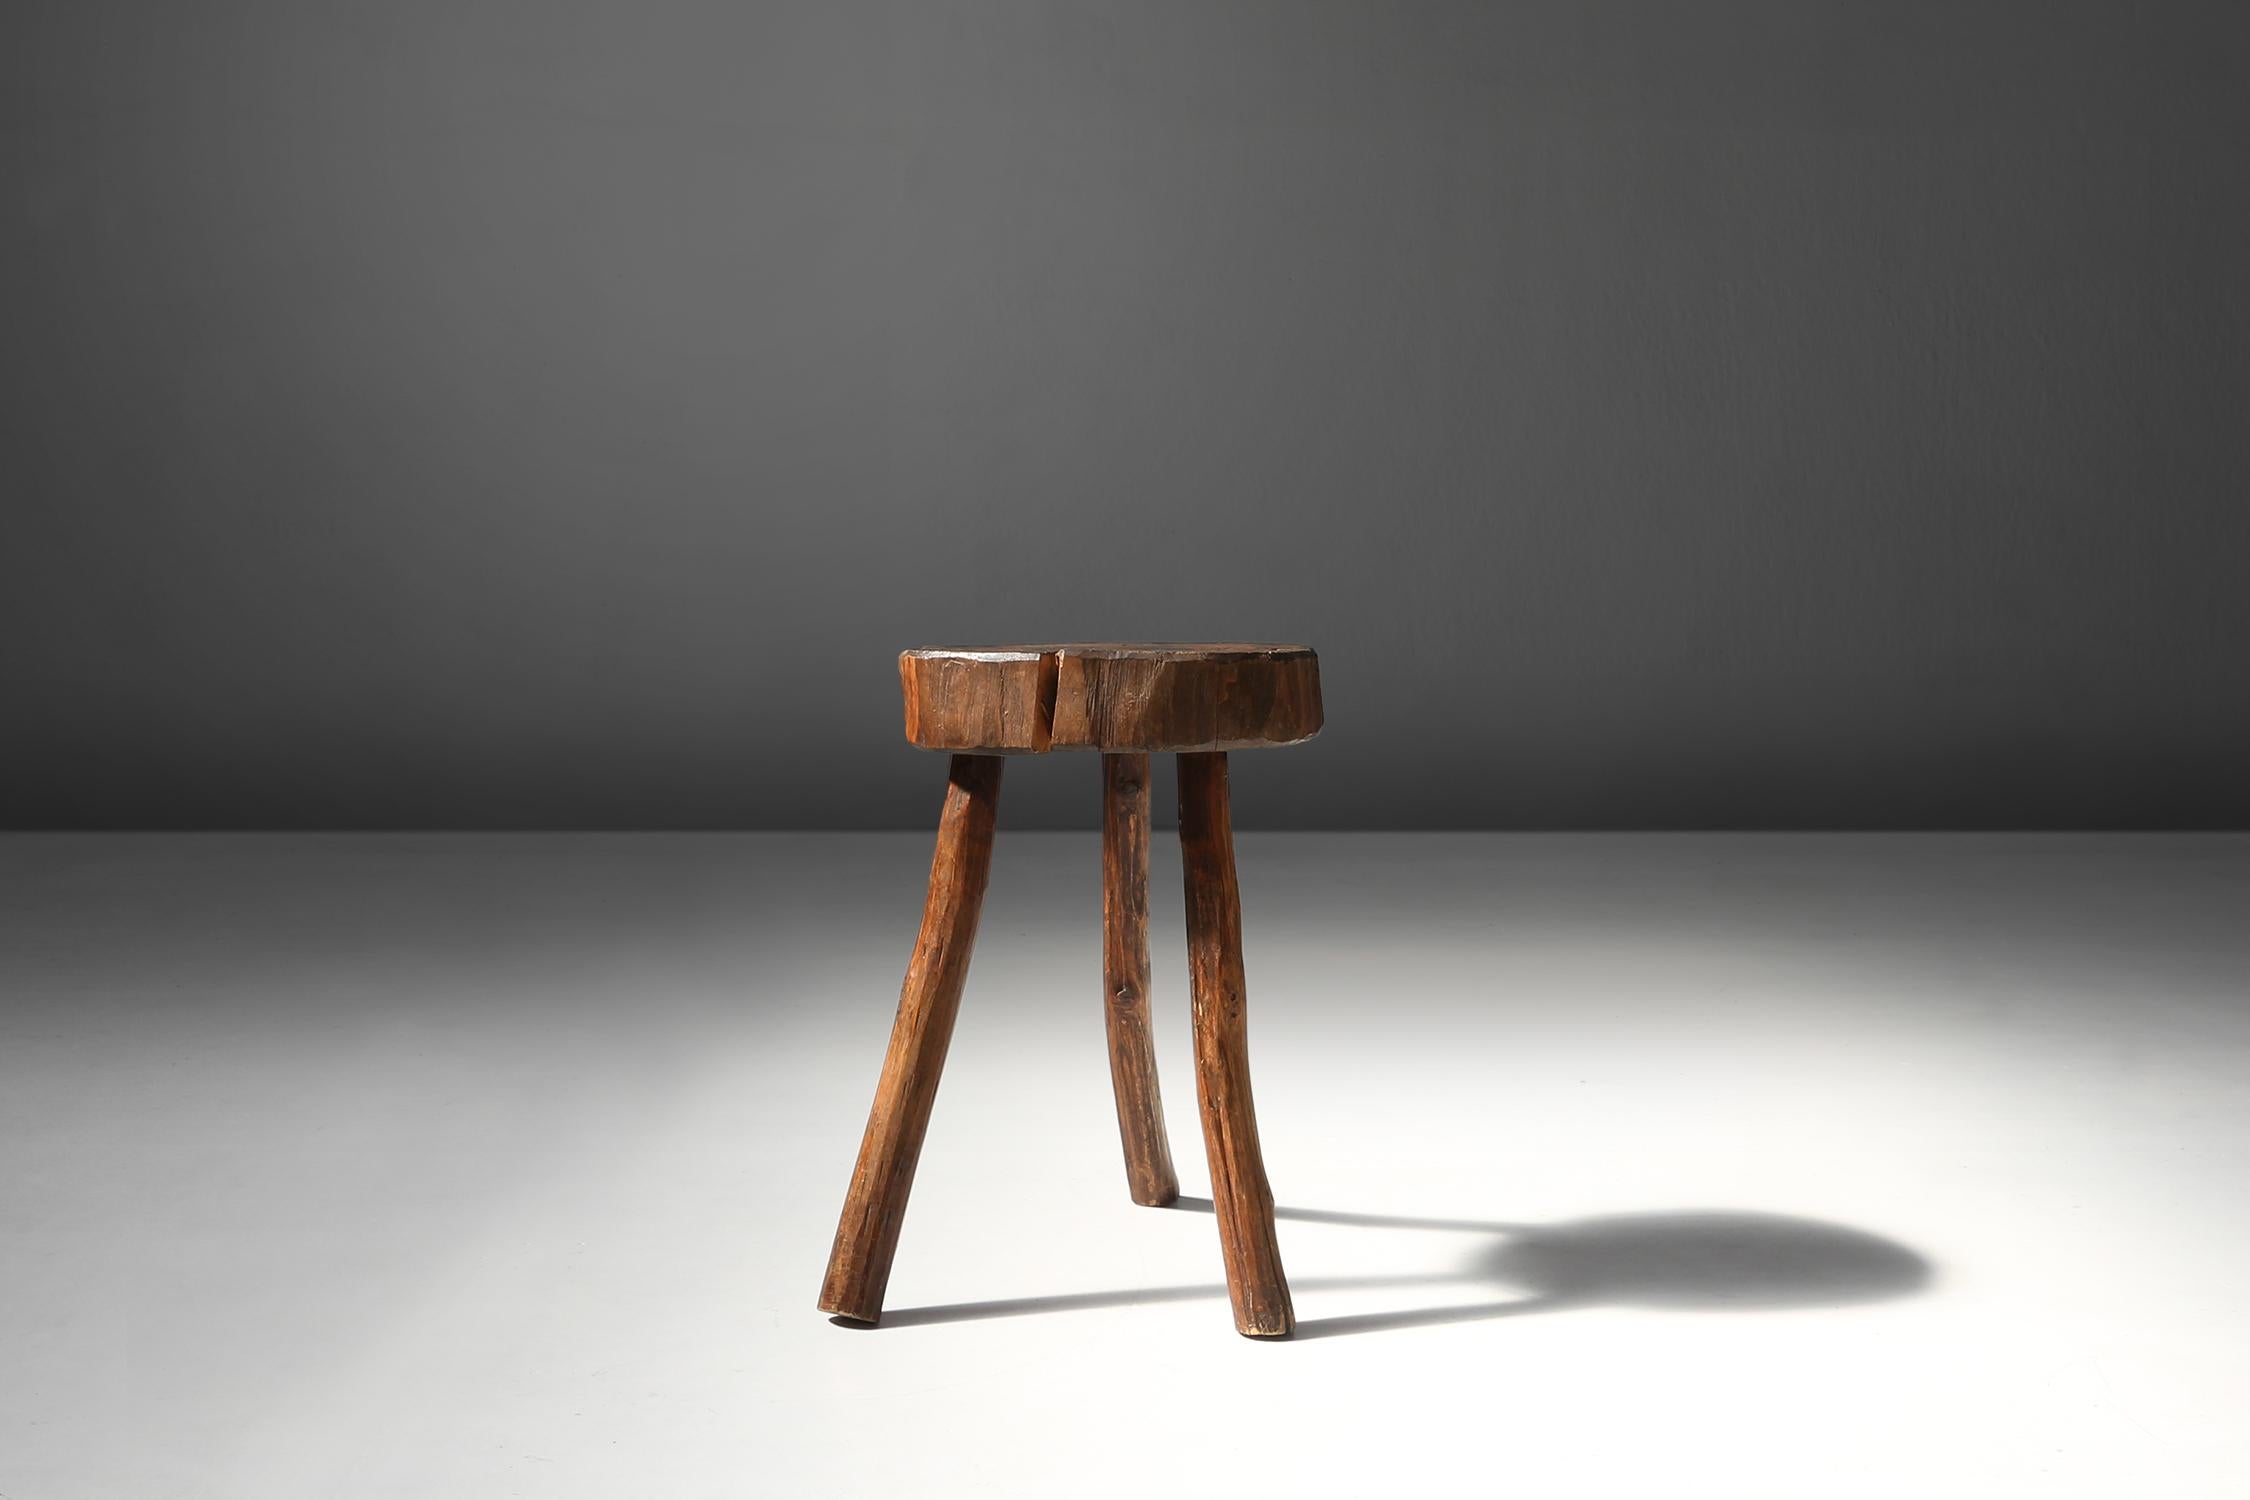 This 19th century wooden stool made from a tree trunk is a unique and authentic piece of furniture that adds a rustic atmosphere to any room.

The stool has three sturdy legs that follow the natural shape of the tree. The wood has a brown color that